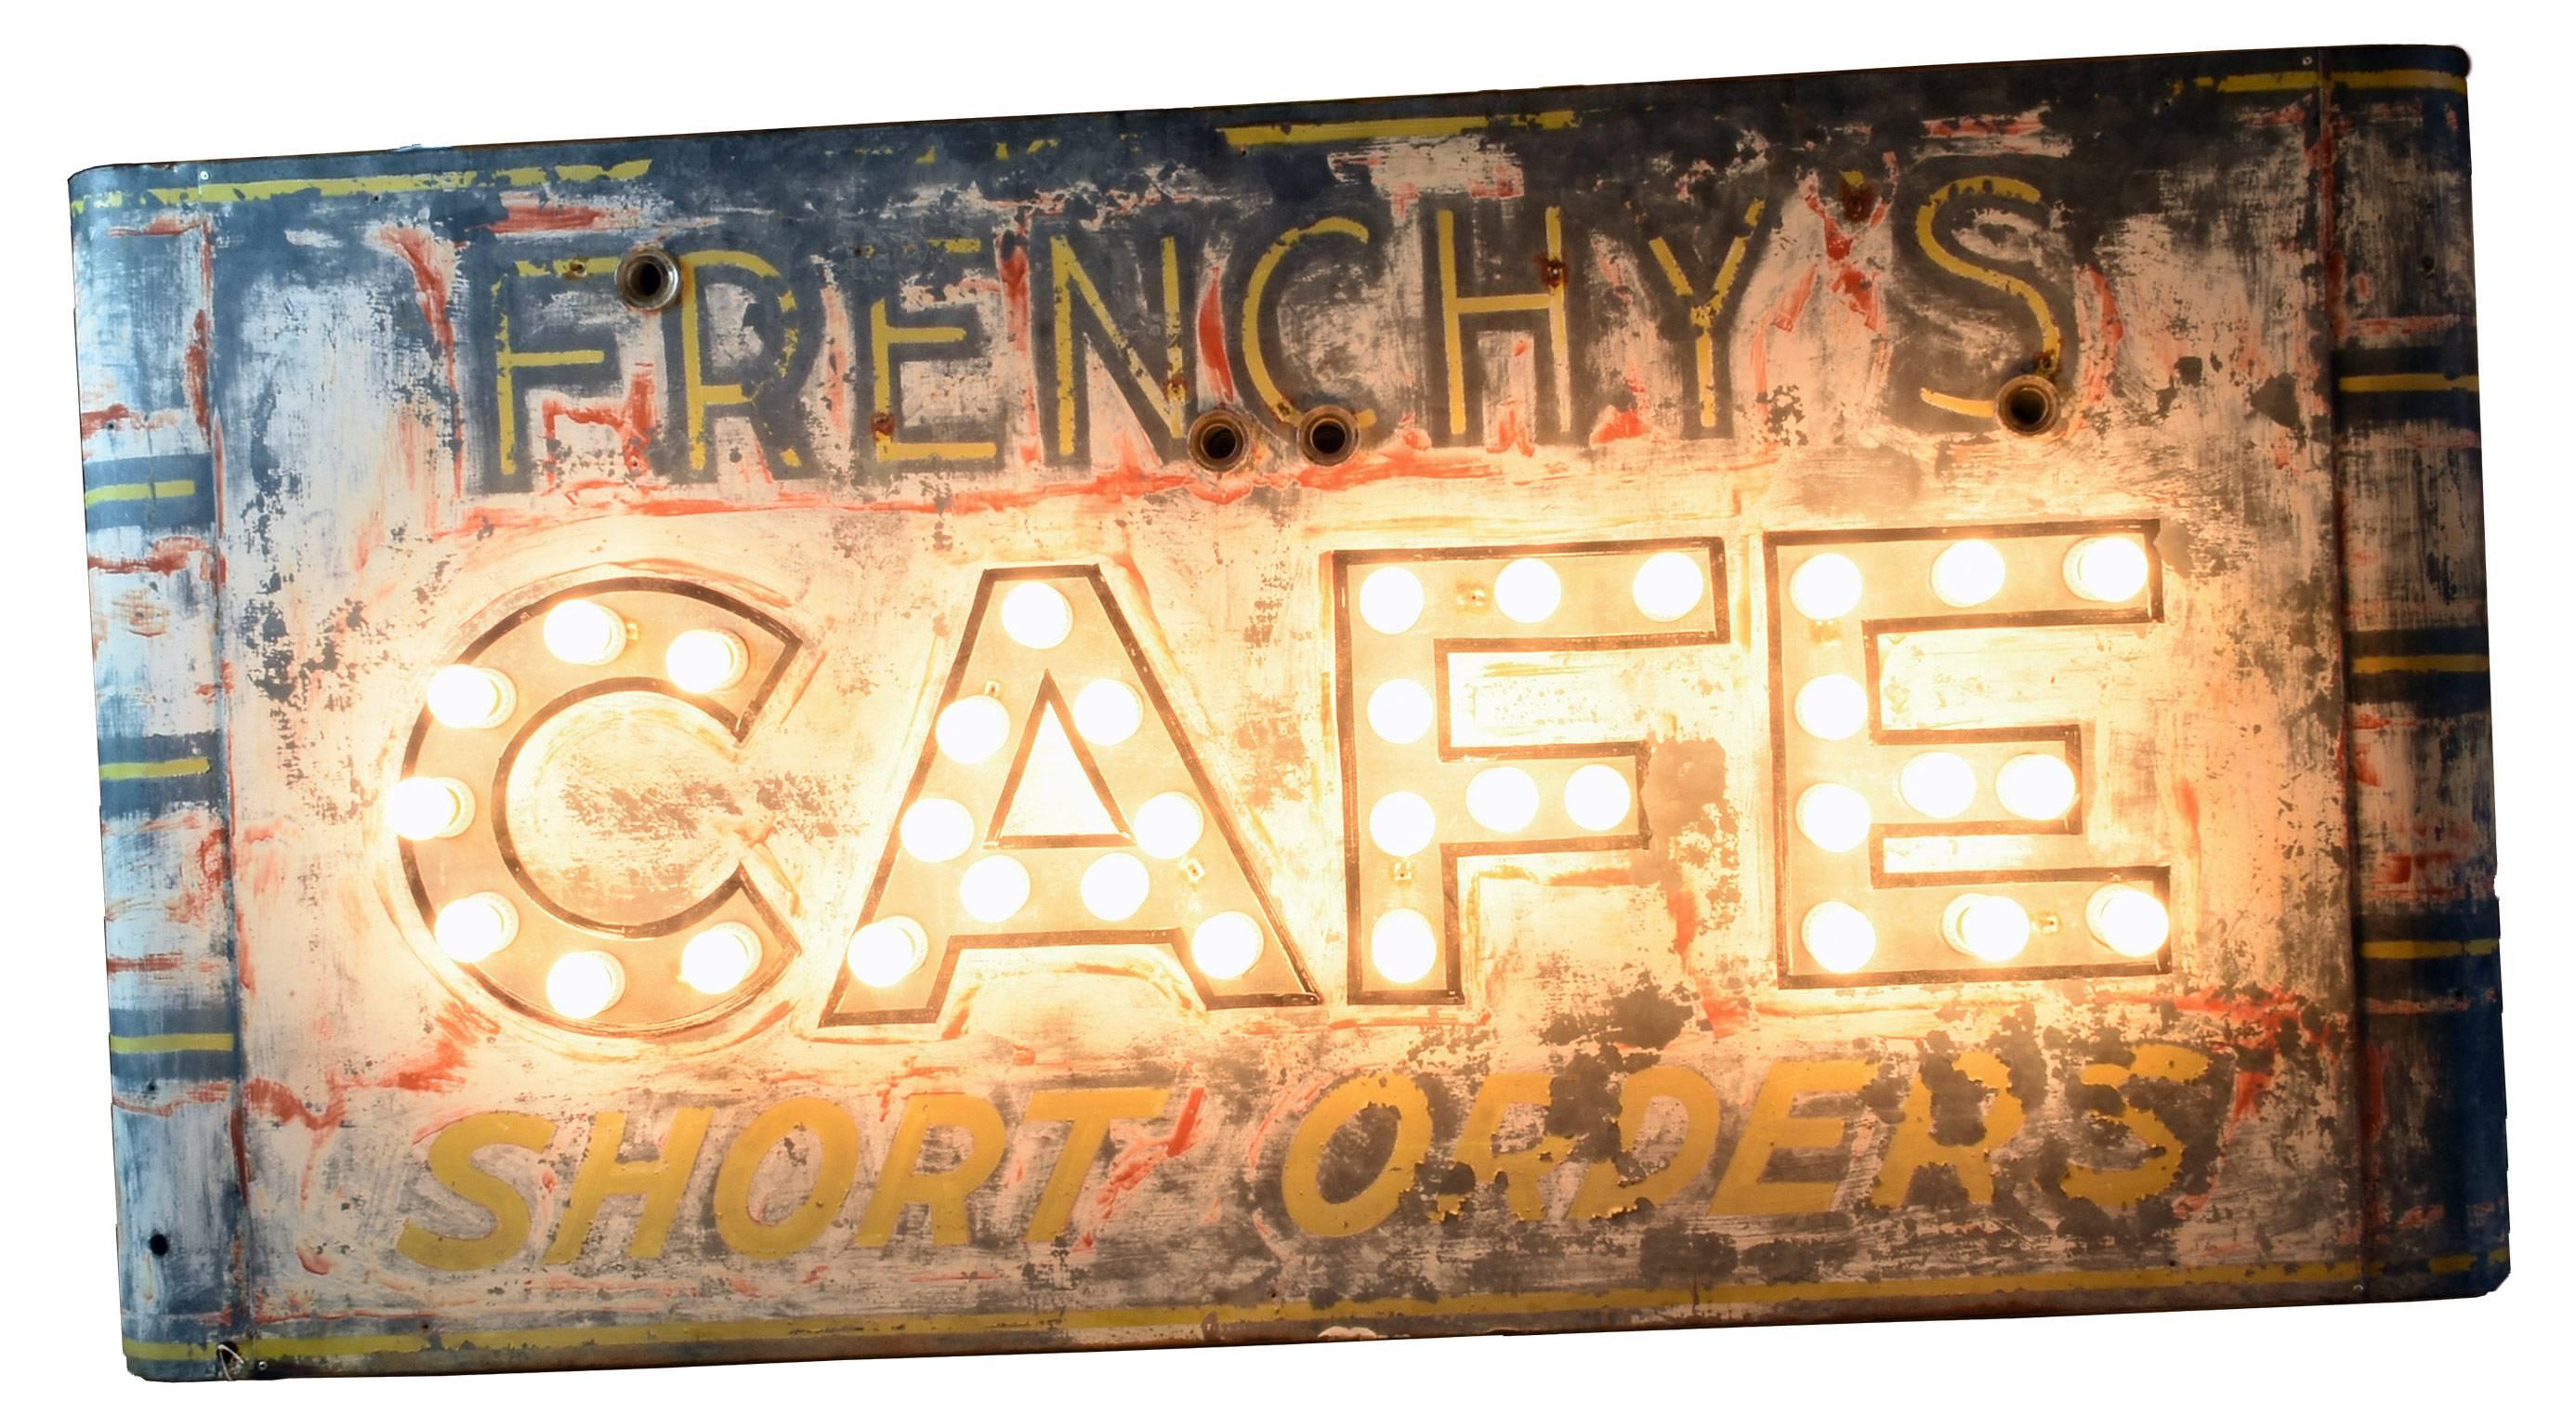 Great sign with the perfect amount of patina, color and charm. Original neon is gone, but instead rewired with marquee bulbs and ready to install. Great wall art from times past. 

We find that early antique lighting was designed as objects of art